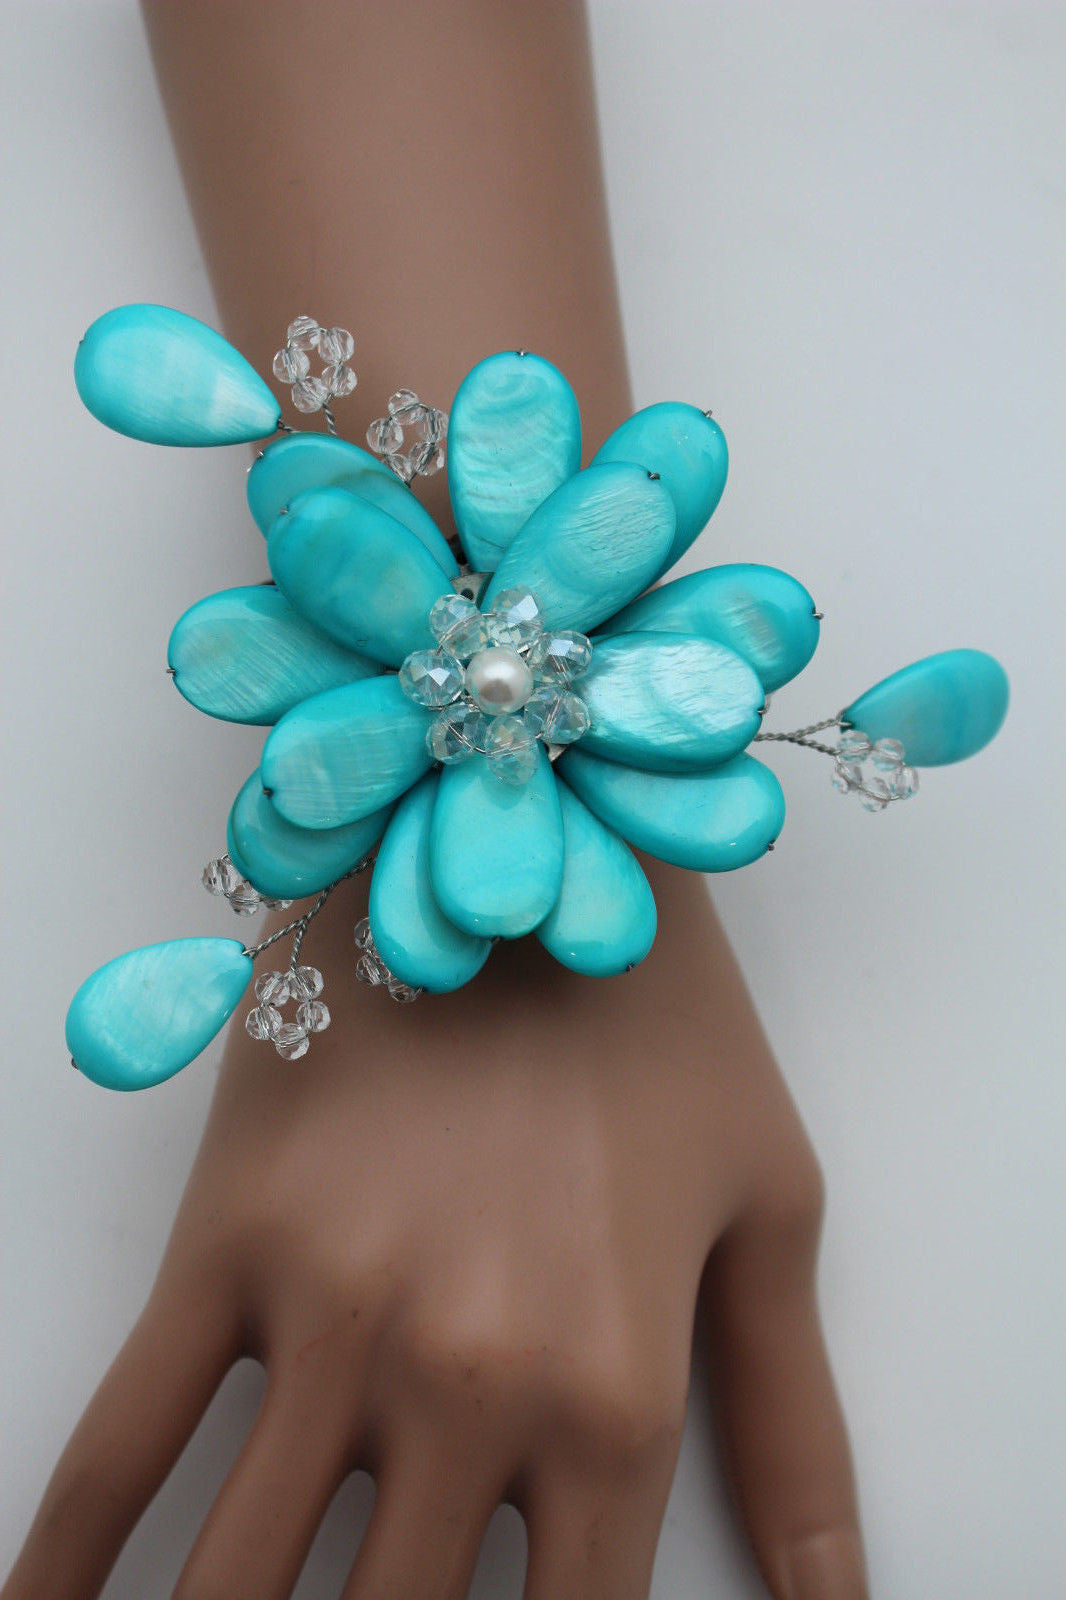 Blue Turquoise Beads Elastic Bracelet Flower Cuff Band Women Fashion Jewelry Accessories - alwaystyle4you - 9